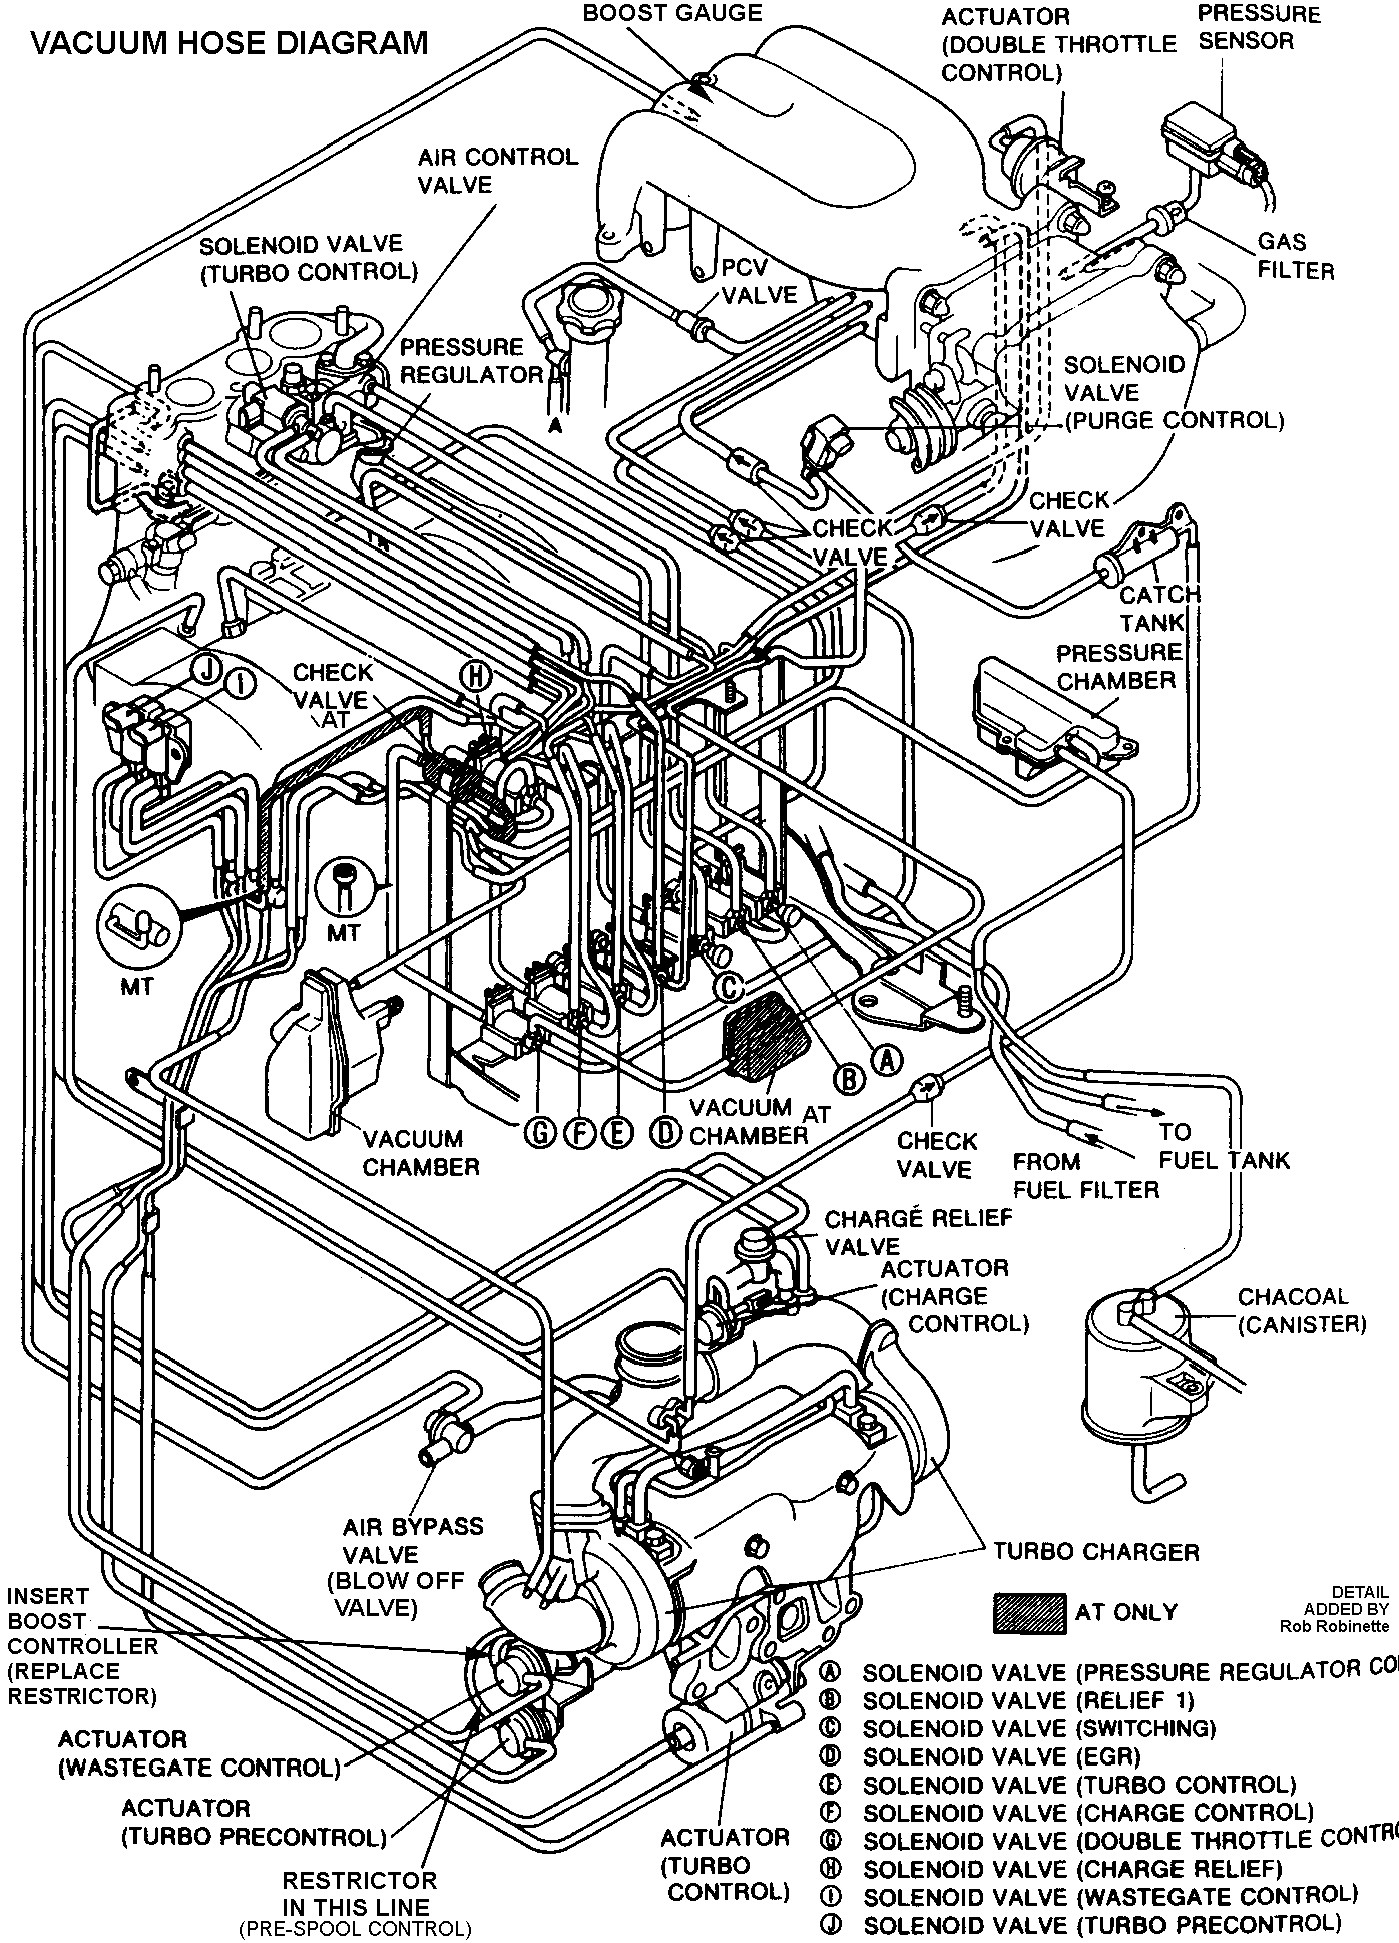 Car Engine Diagram Labeled 94 Miata 1 8 Engine Diagram Another Blog About Wiring Diagram • Of Car Engine Diagram Labeled